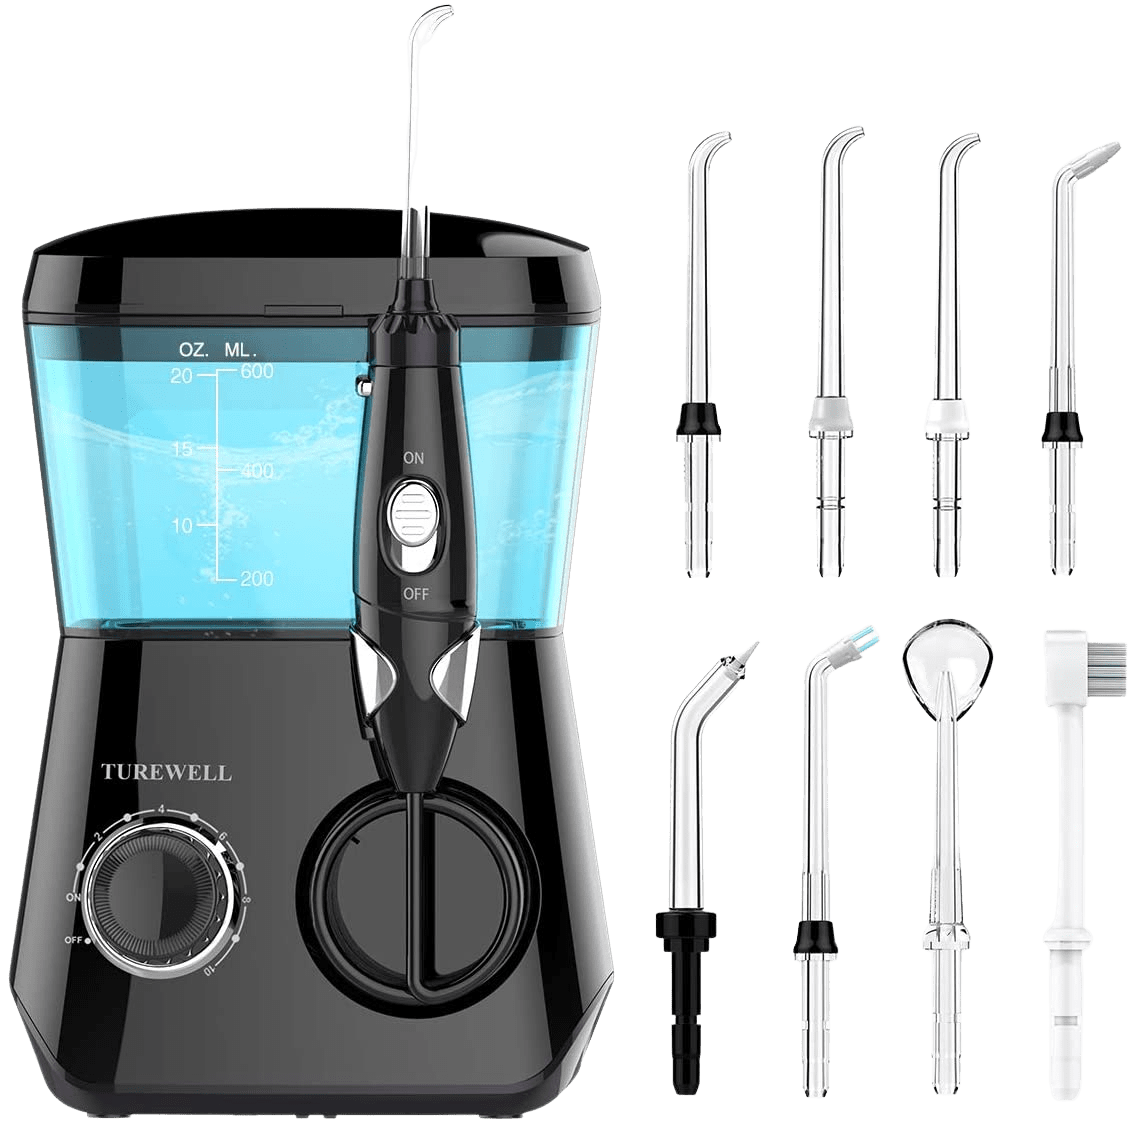 TUREWELL Water Flossing Oral Irrigator, 600ML Dental Water Teeth Cleaner 10 Adjustable Pressure, Electric Dental Pick Flosser for Teeth/Braces, 8 Water Jet Tips for Family (Black) - Home Decor Gifts and More